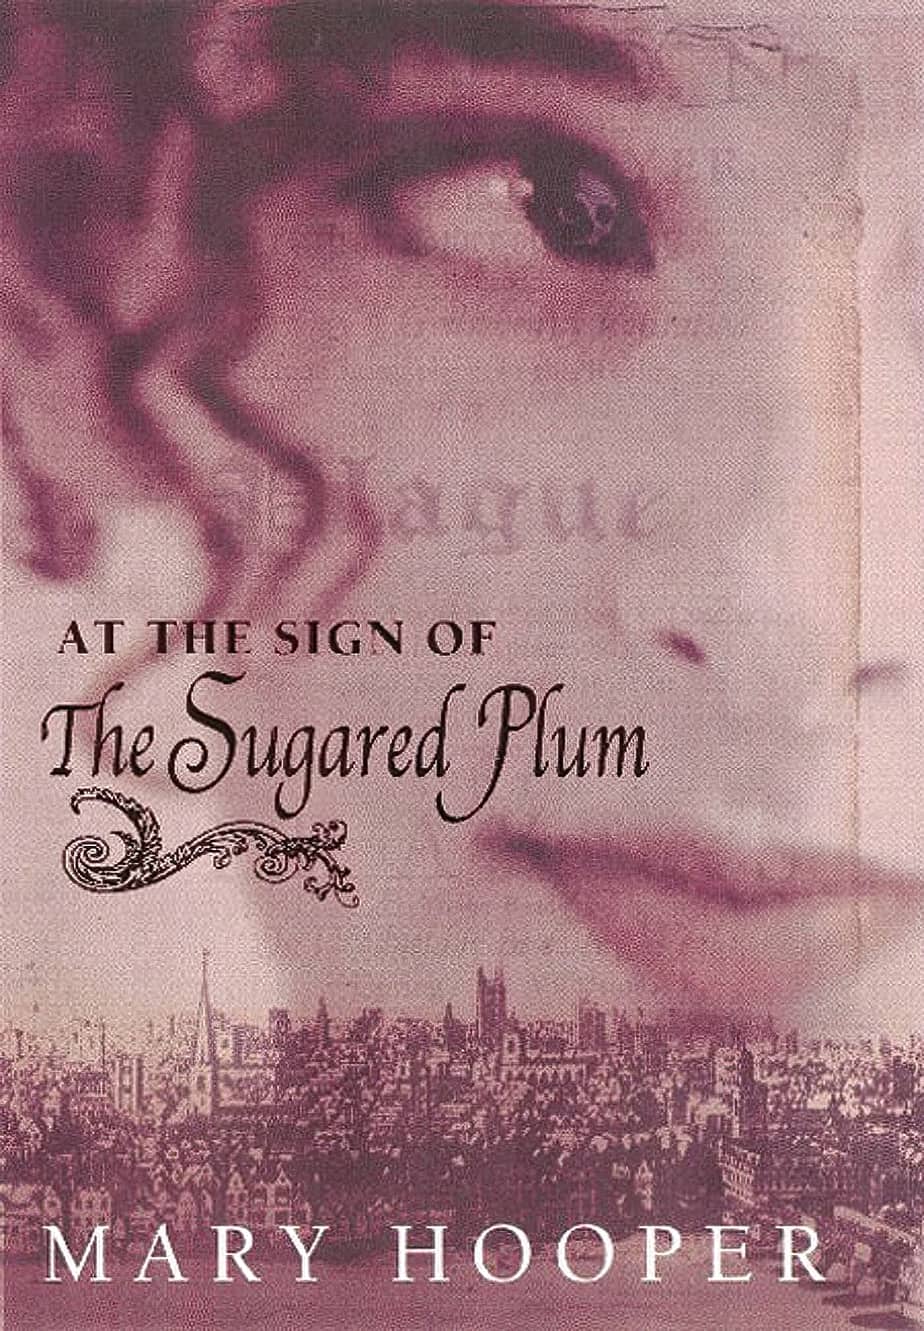 At The Sign of the Sugared Plum by Mary Hooper